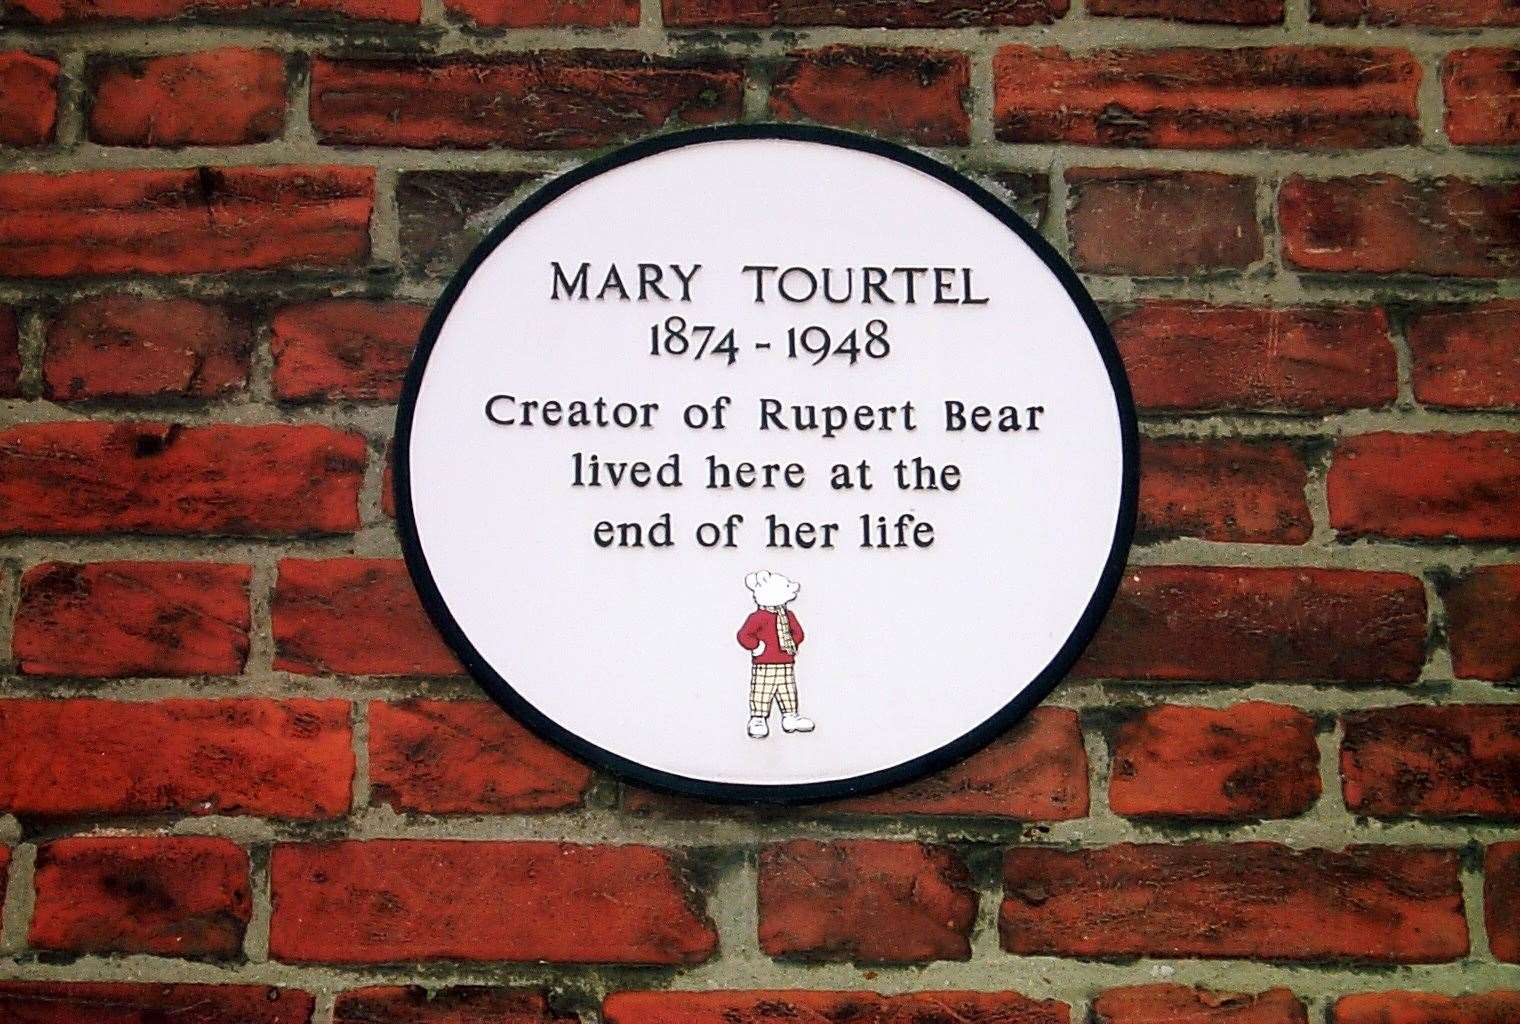 The plaque on the side of the Chaucer Hotel in Canterbury where Mary Tourtel spent her final months